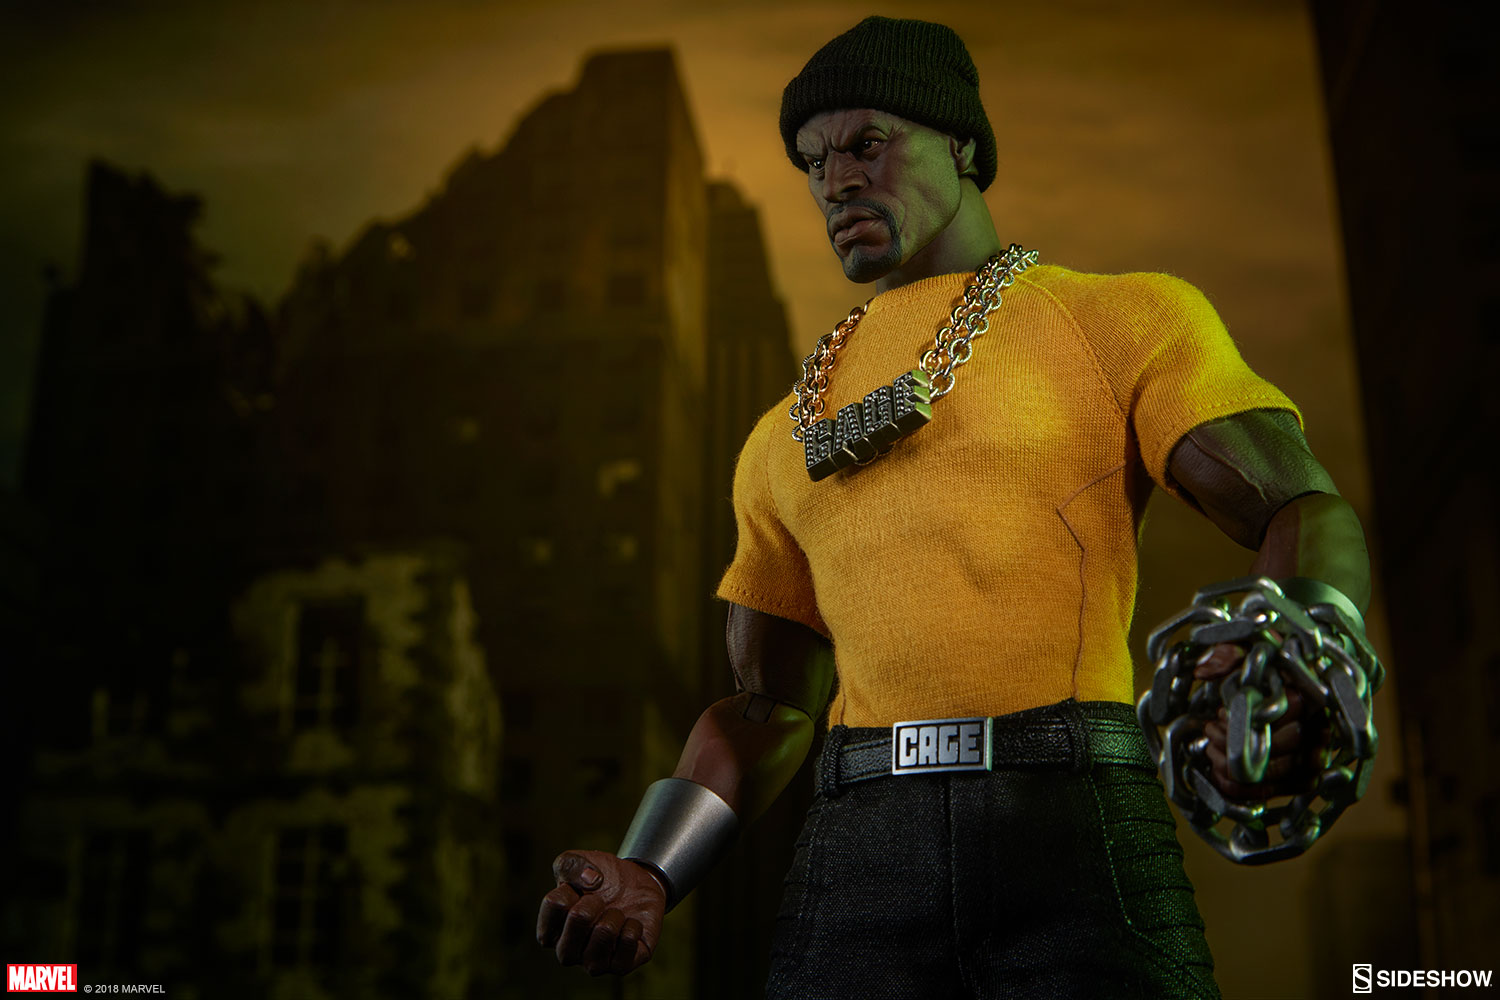 sideshow - NEW PRODUCT: Luke Cage Sixth Scale Figure by Sideshow Collectibles 739